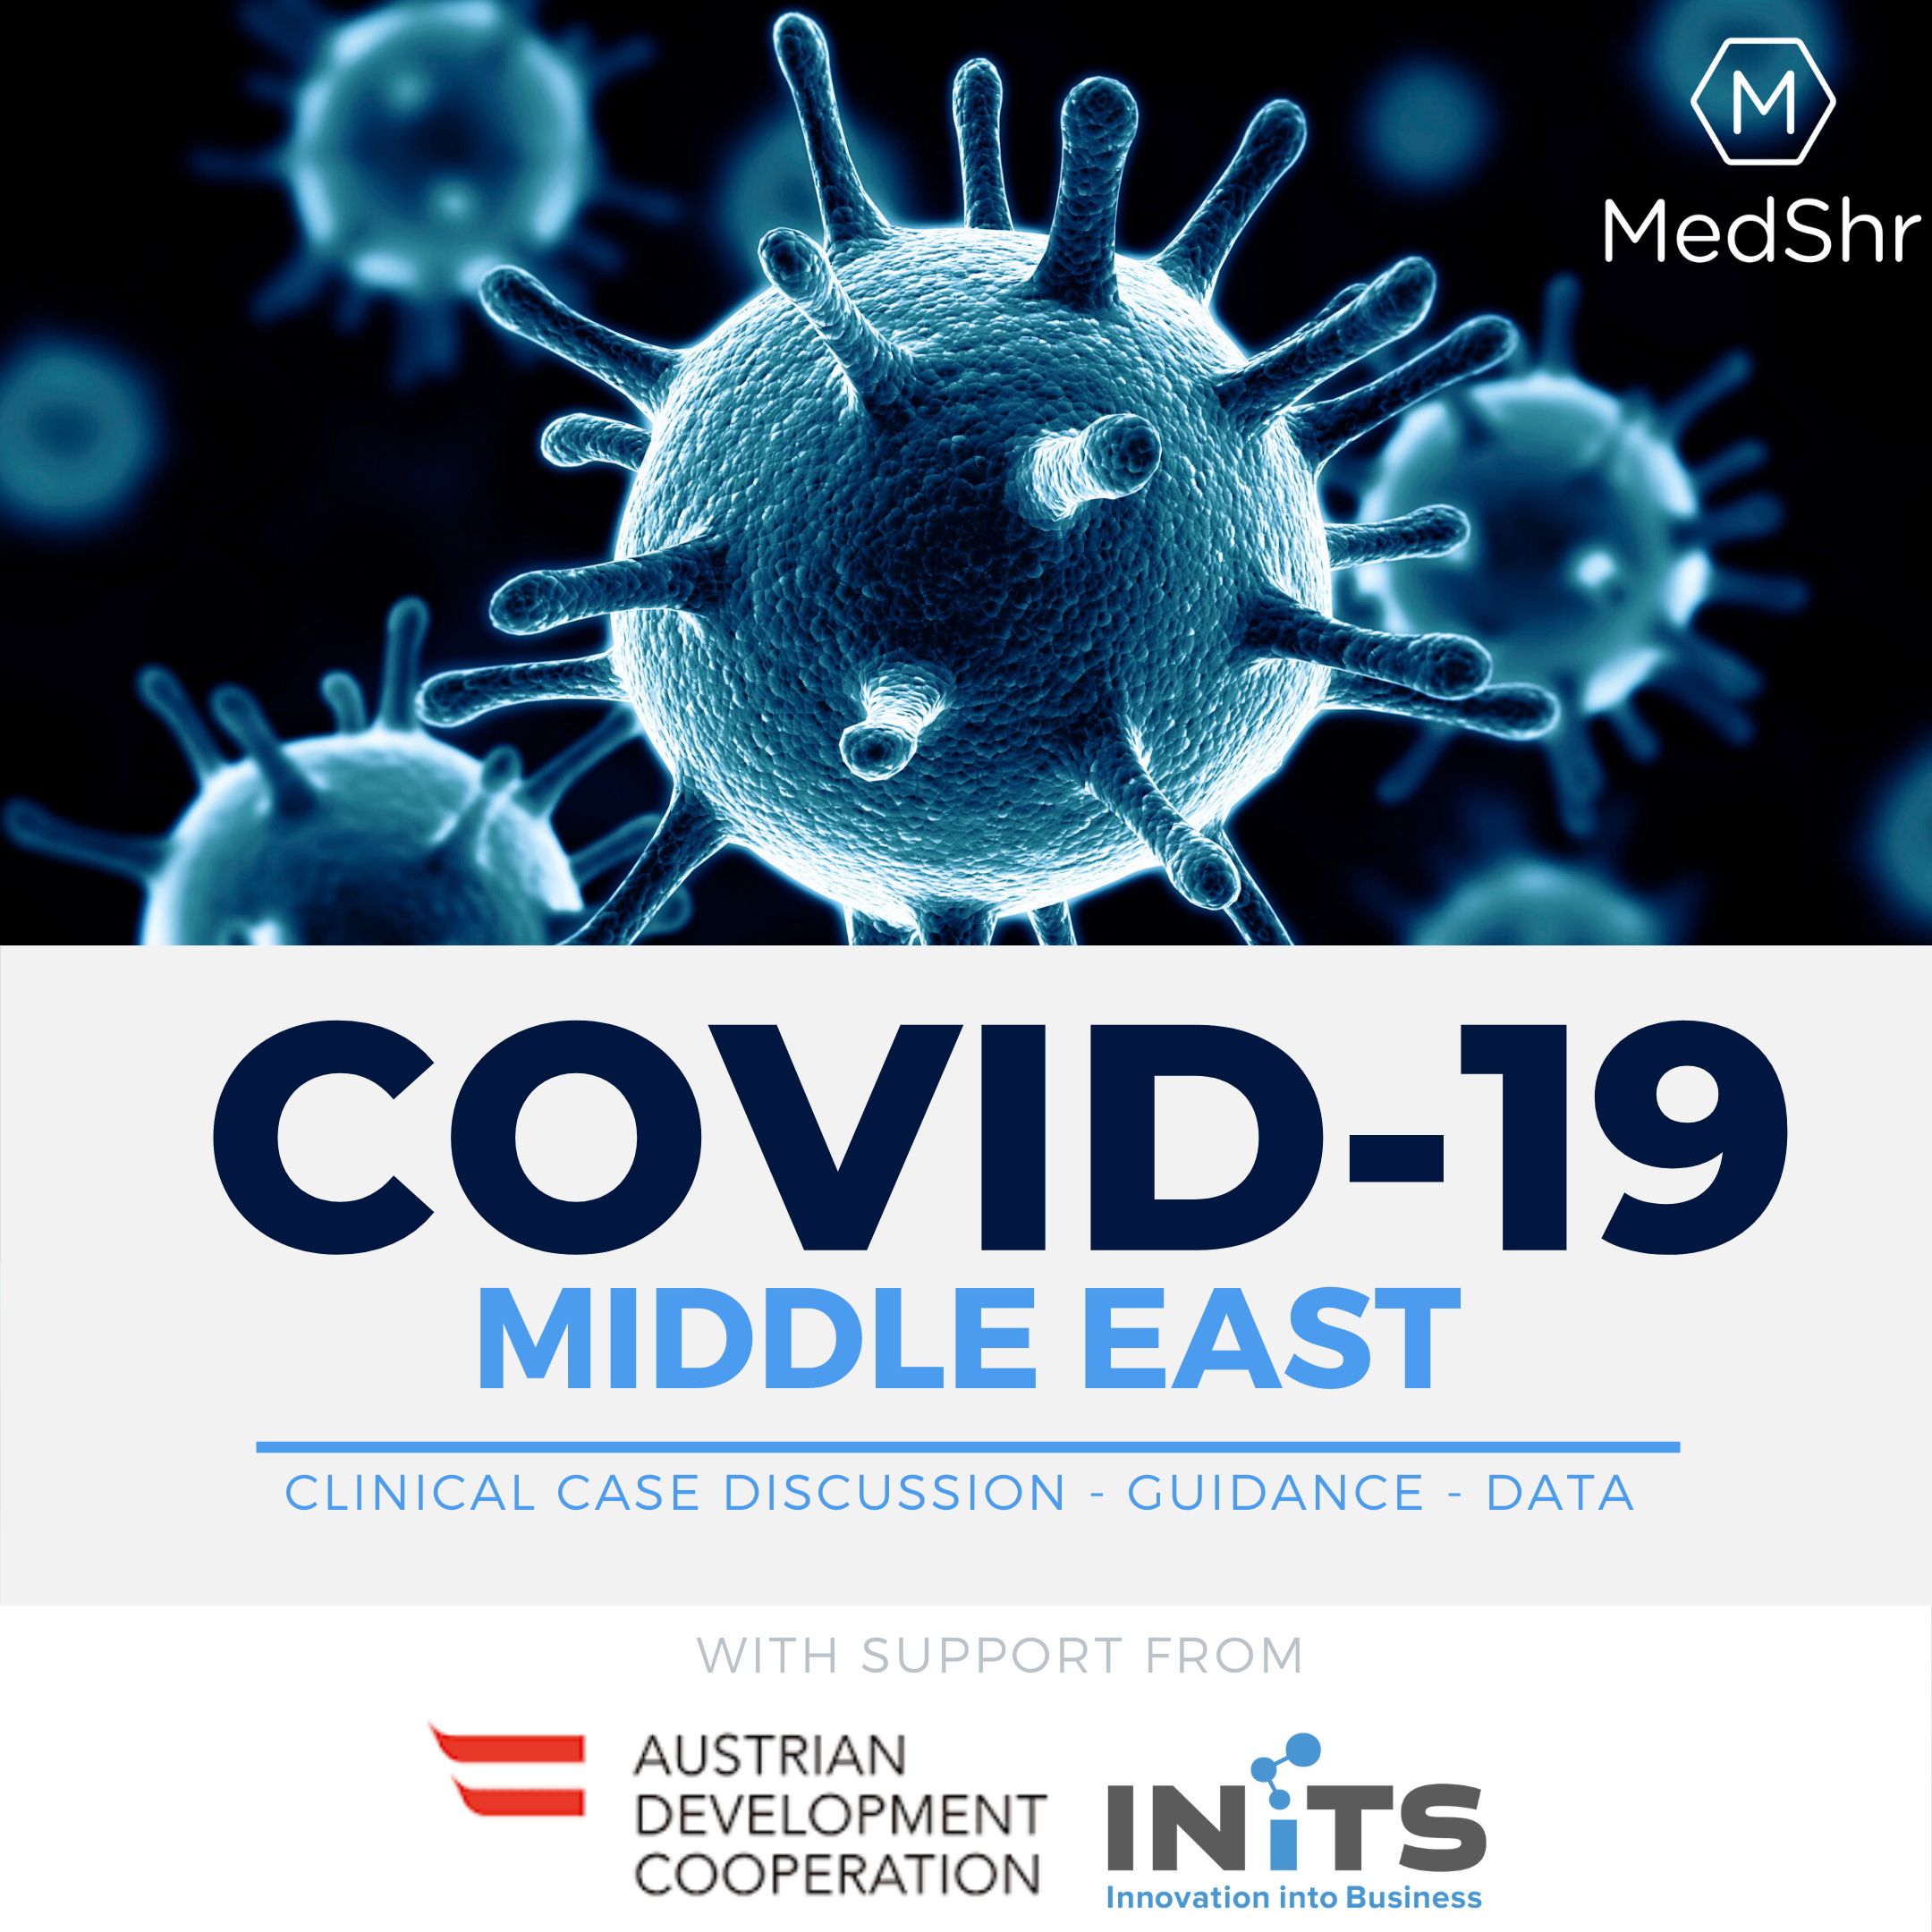 COVID-19 Middle East medical education programme for doctors